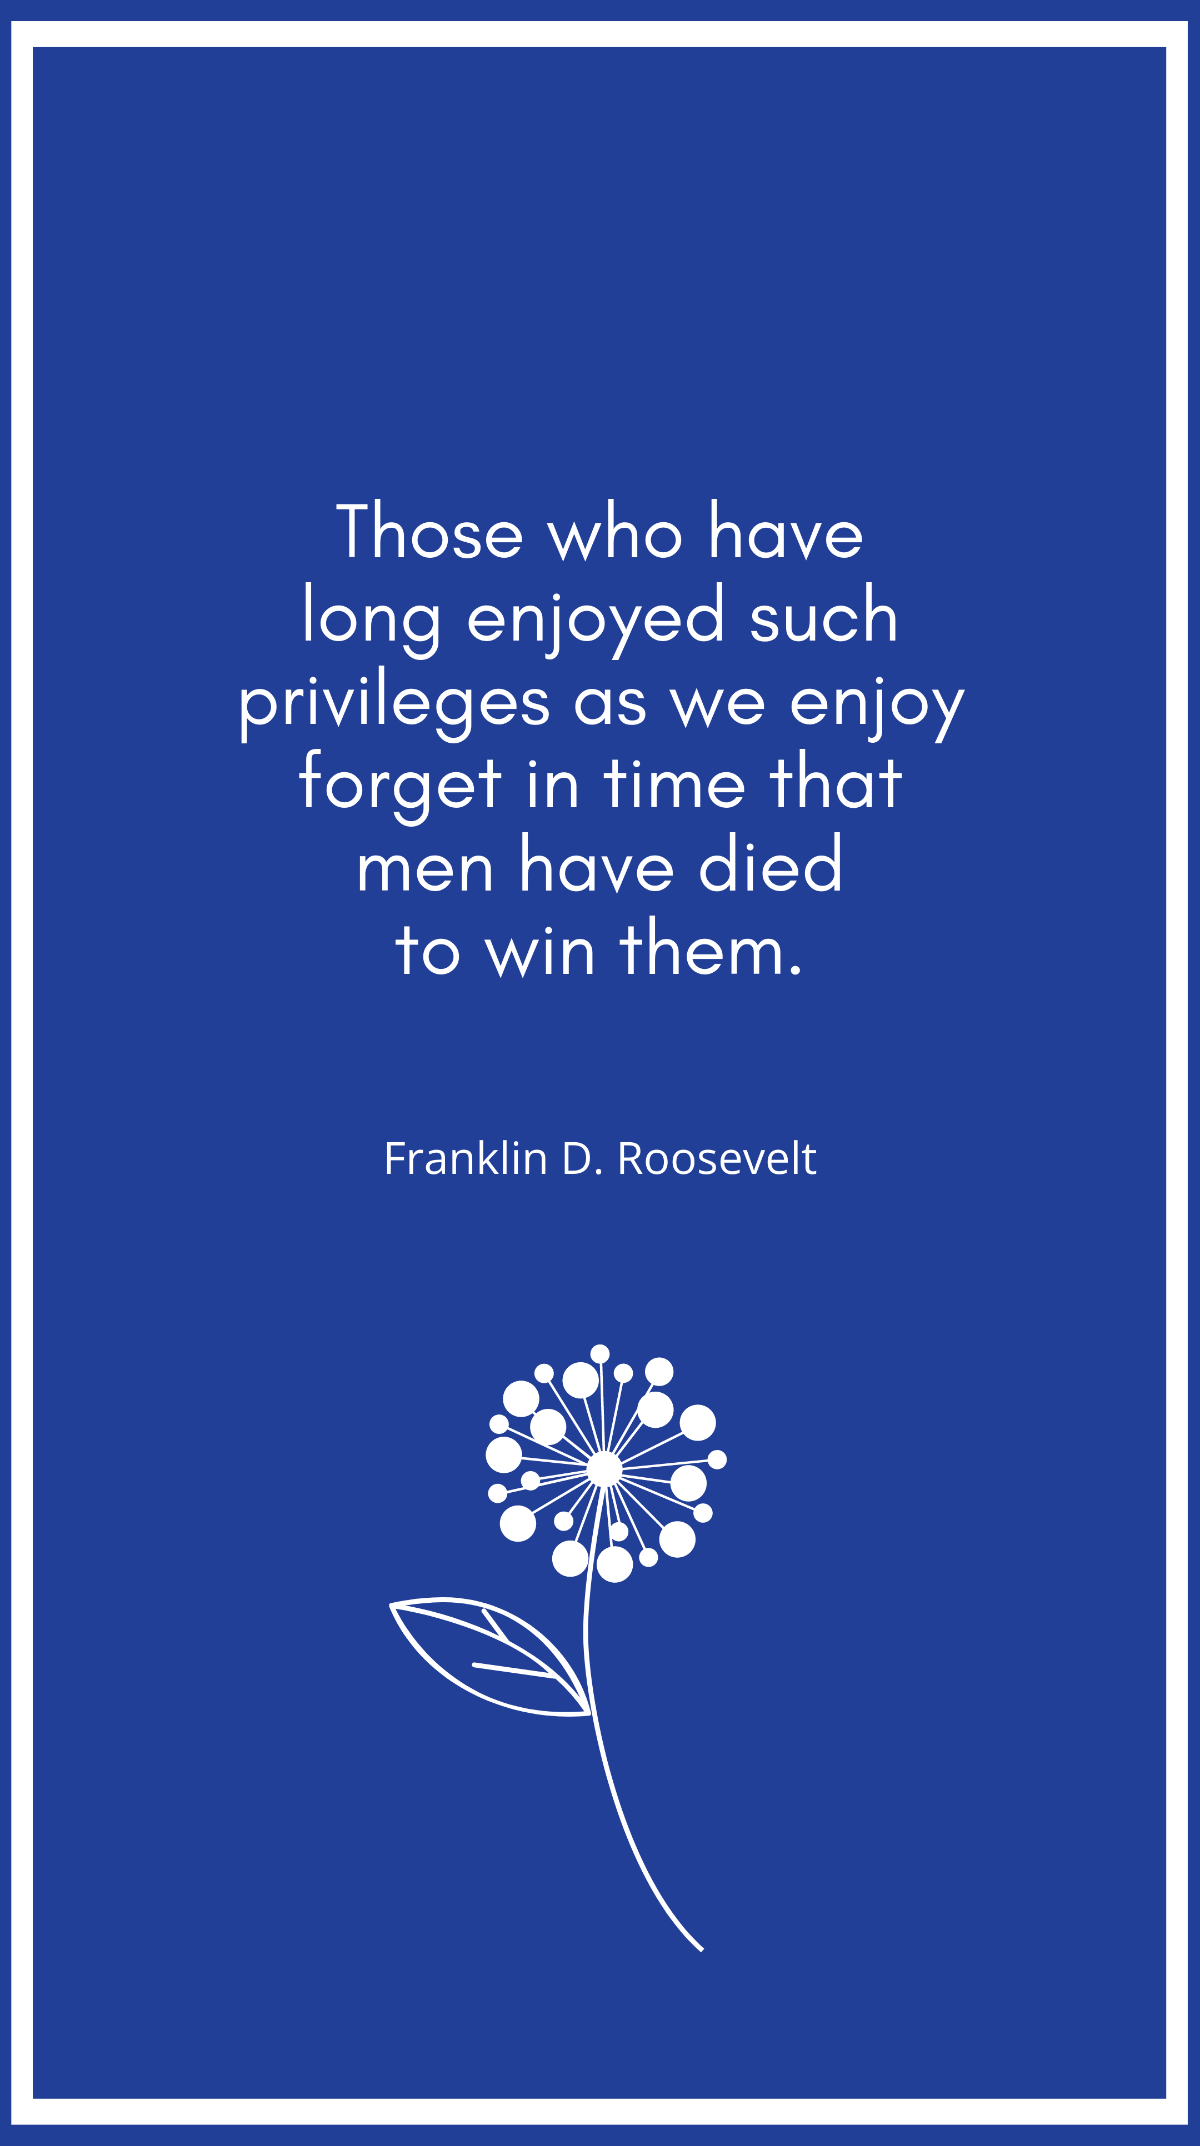 Franklin D. Roosevelt - Those who have long enjoyed such privileges as we enjoy forget in time that men have died to win them.